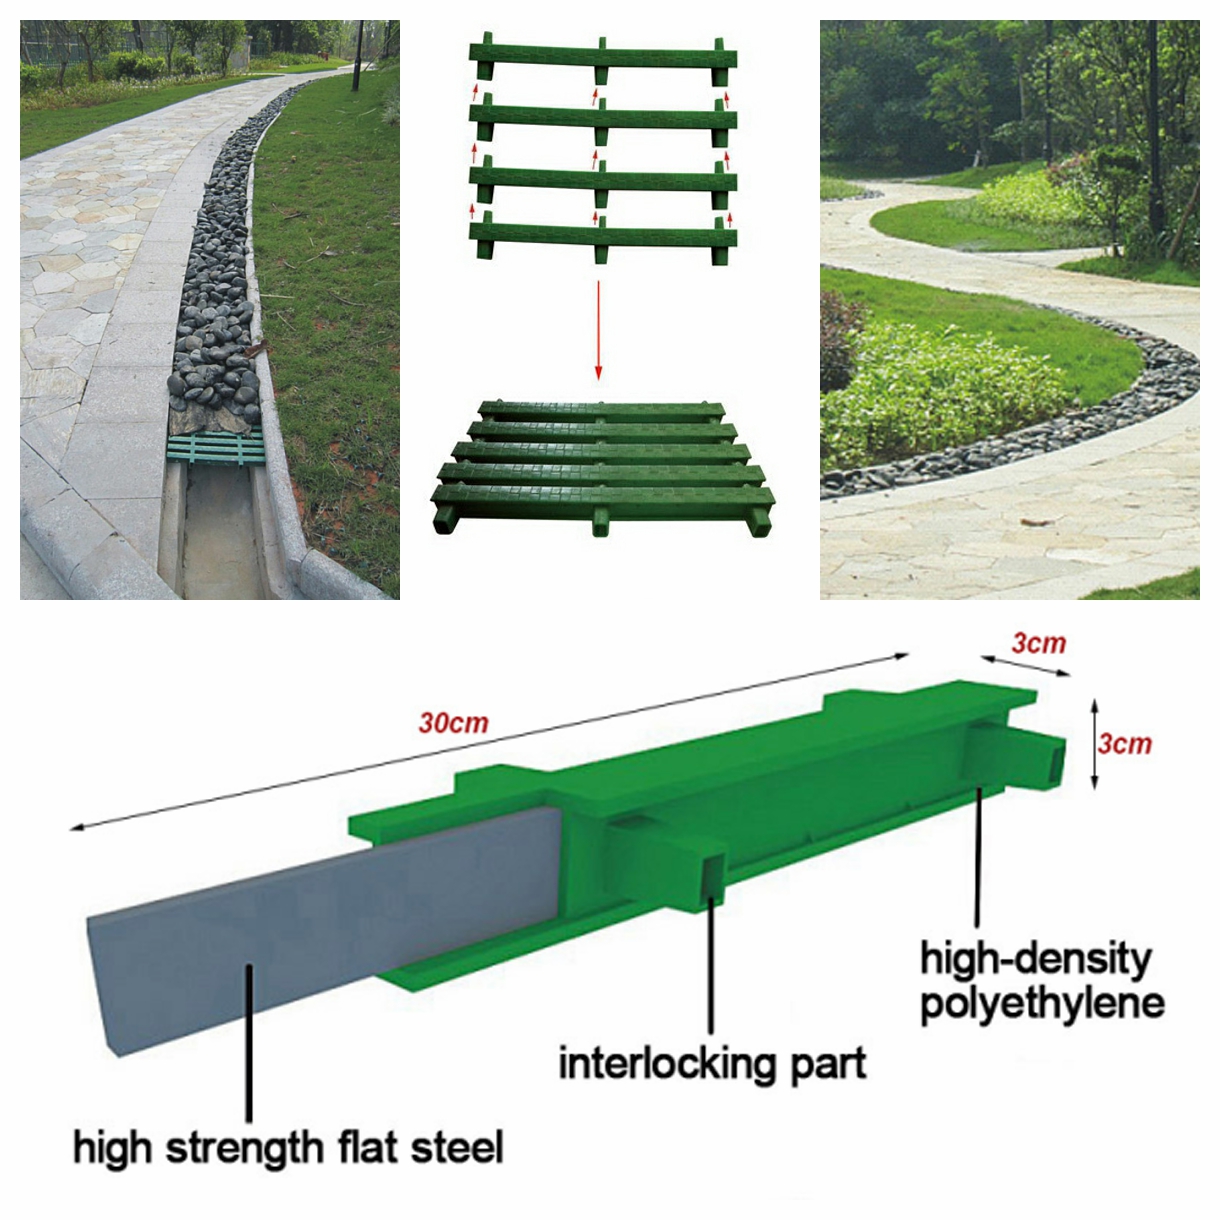 Steel-Reinforced Plastic Trench Drain Grates: Combining High Strength with Aesthetic Appeal